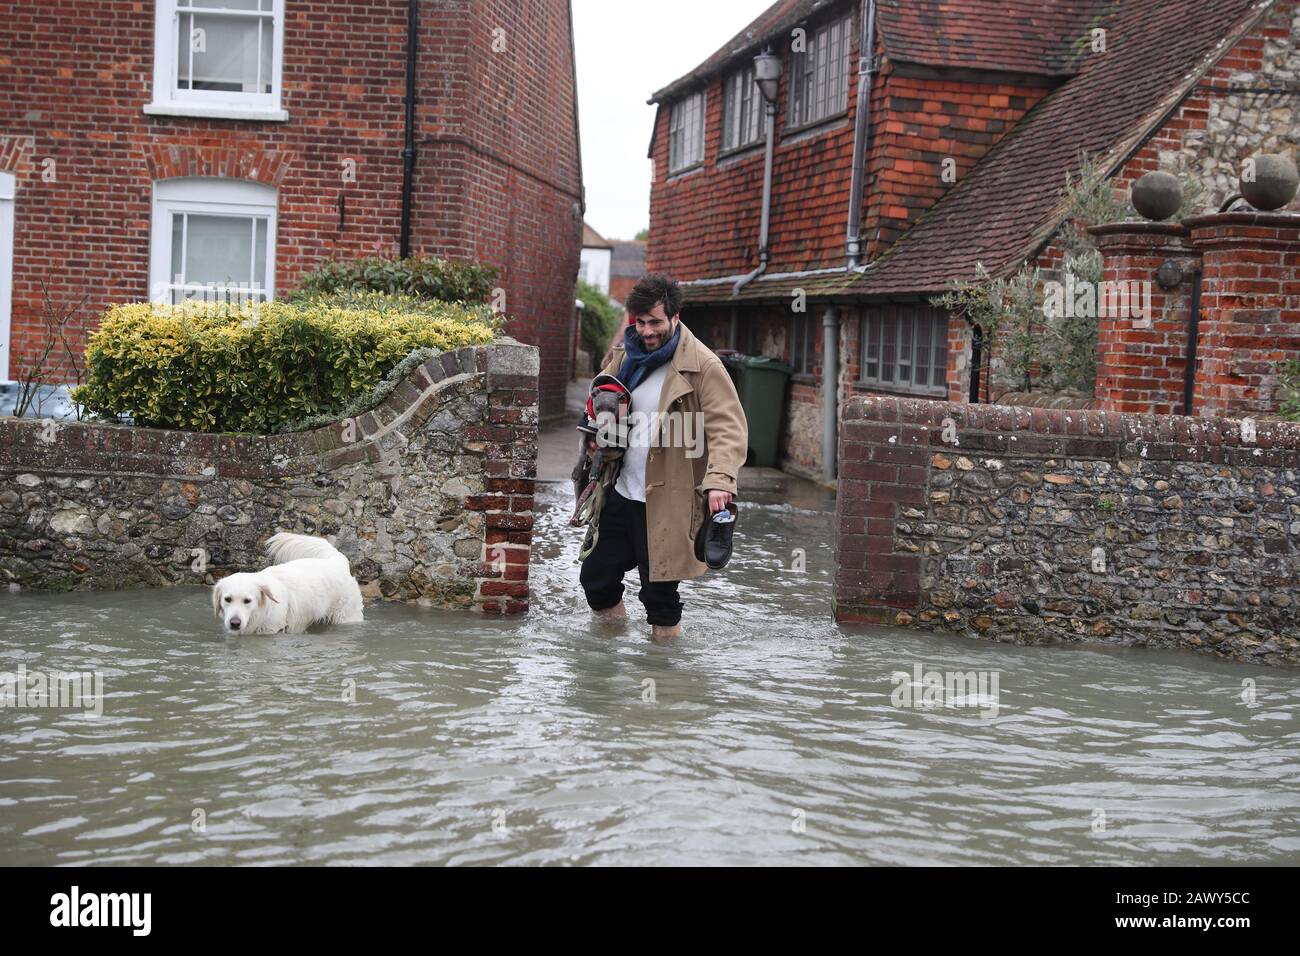 Flooding in Bosham, Sussex caused by the high tide, the Met Office have said that 'a spell of very strong winds,' with gusts of 60-70mph, is expected across southern England on Monday, bringing likely delays to road, rail, air and ferry transport. Stock Photo